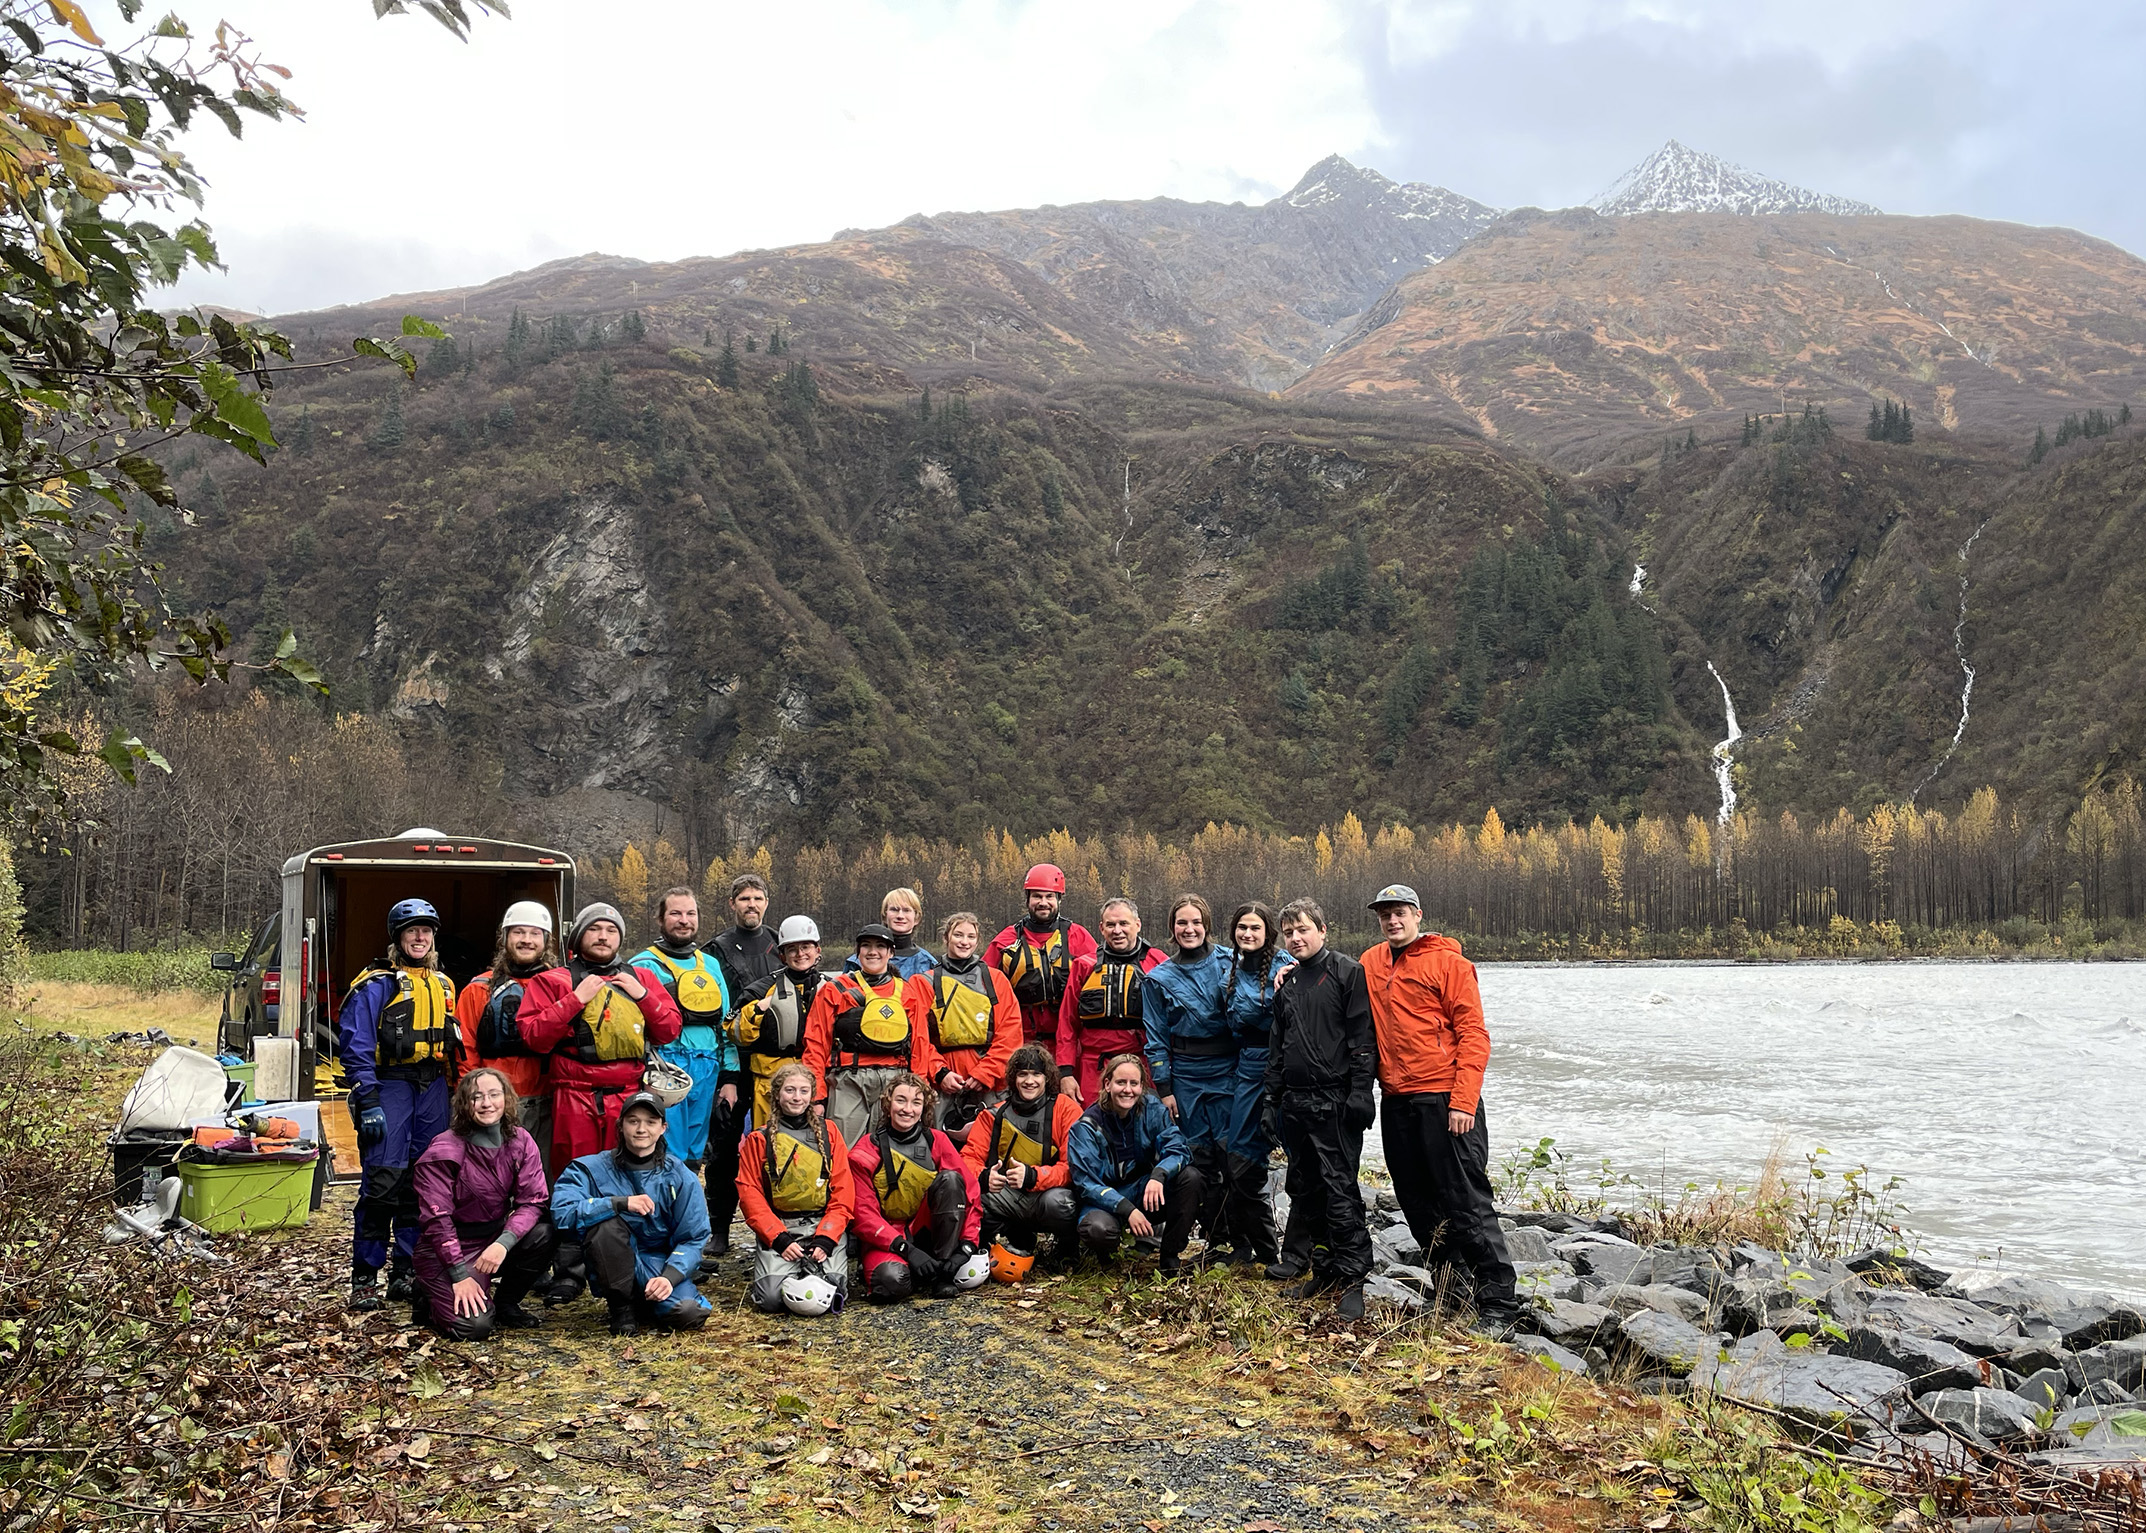 Students, staff and faculty from four universities take a break for a group photo before getting in the water for a rafting trip down the Lowe river through historic Keystone Canyon as part of an outdoor leadership conference.